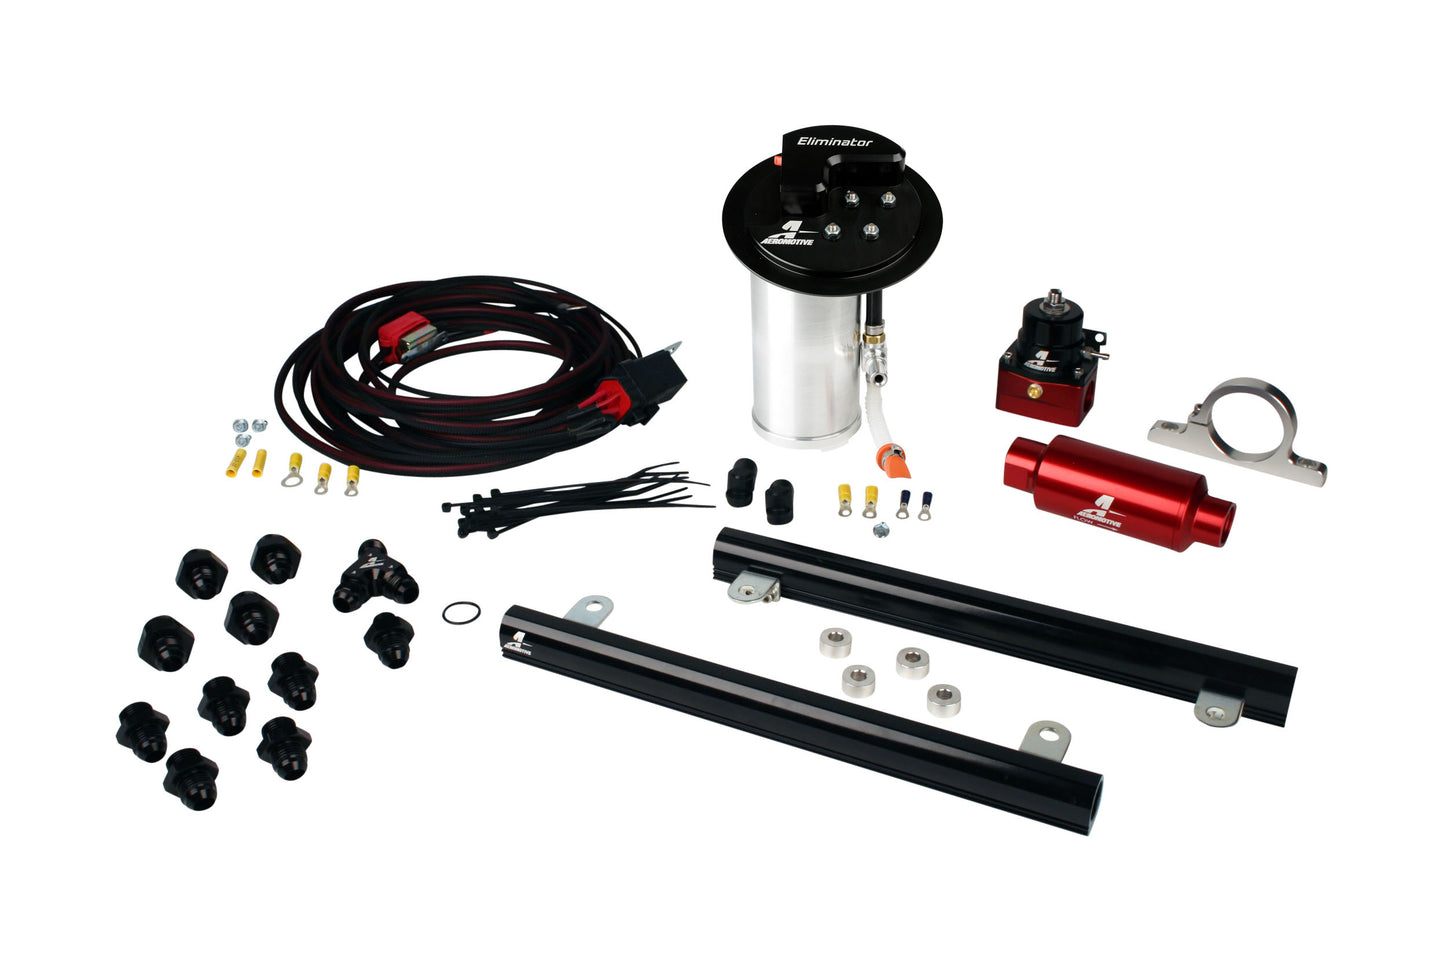 10-17 Mustang GT Stealth Eliminator Racing System with 5.4L CJ Fuel Rails